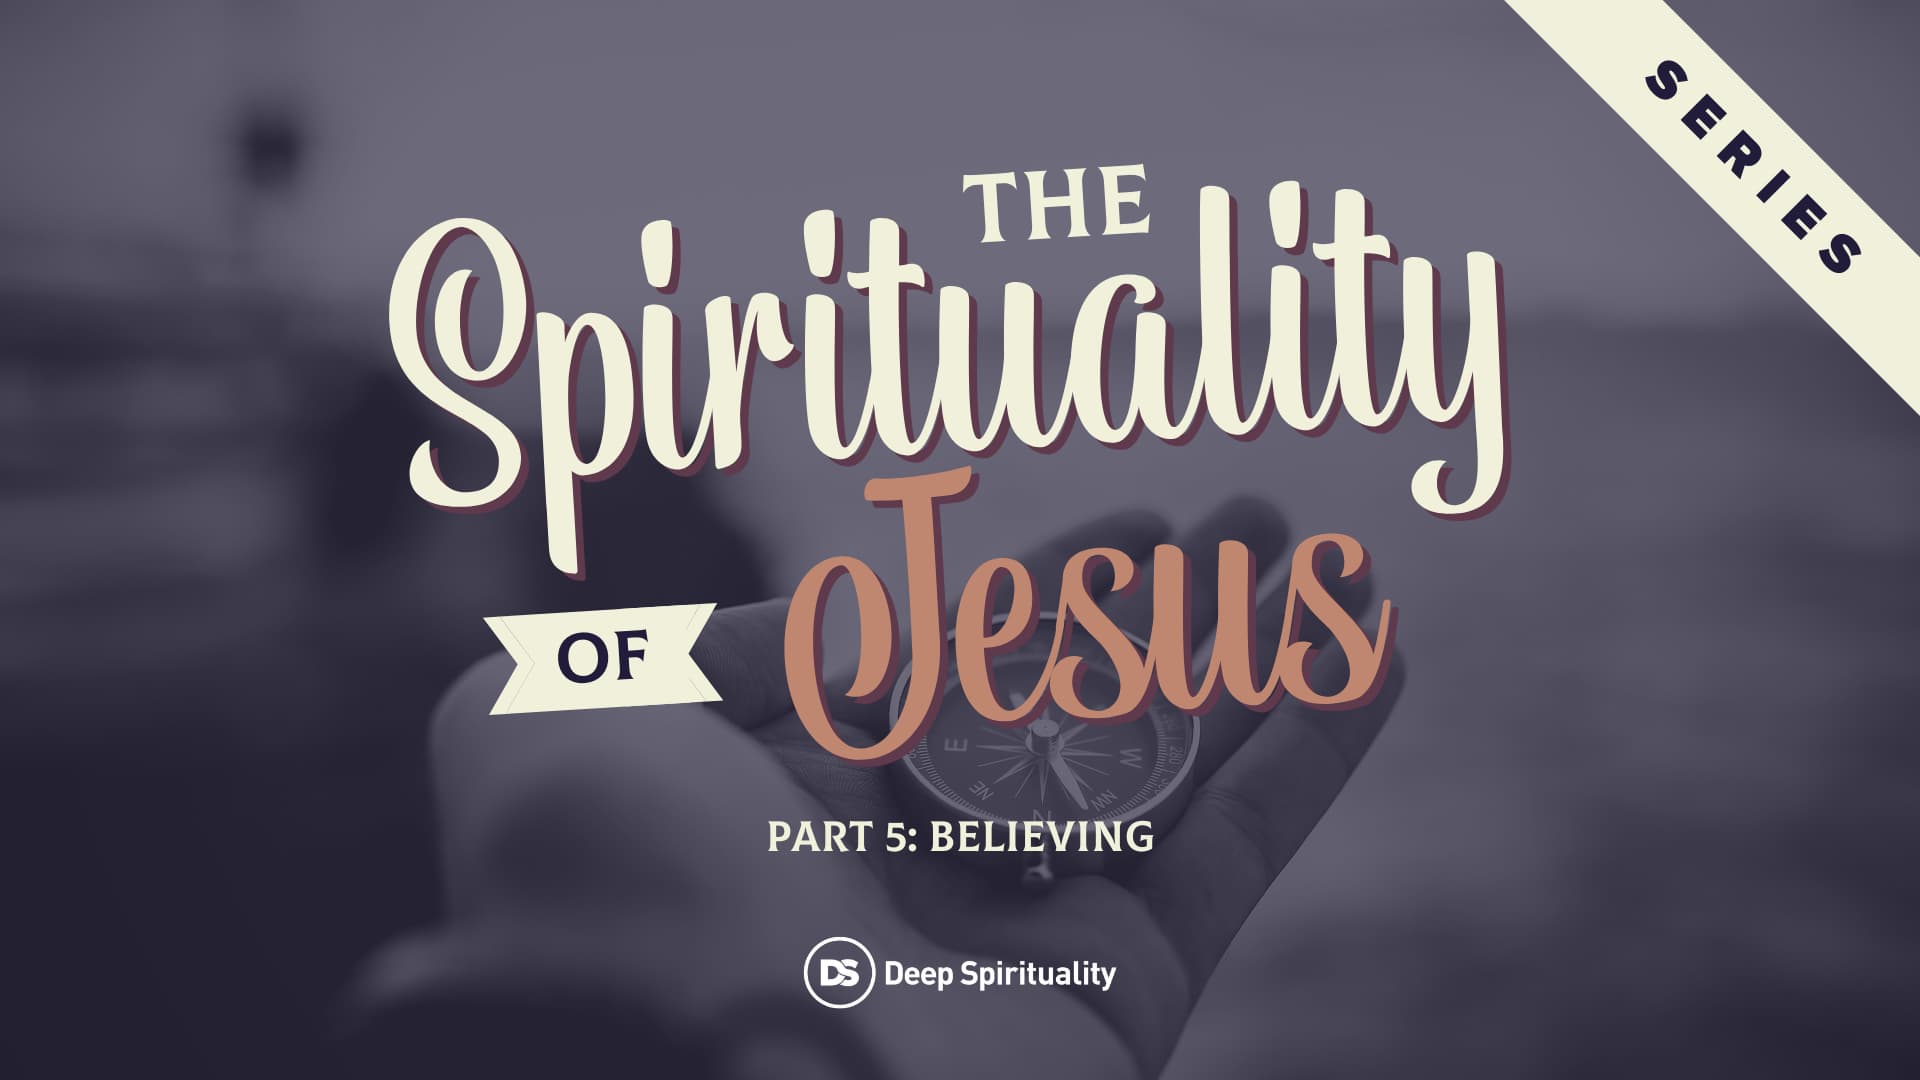 The Spirituality of Jesus, Part 5: Believing 6